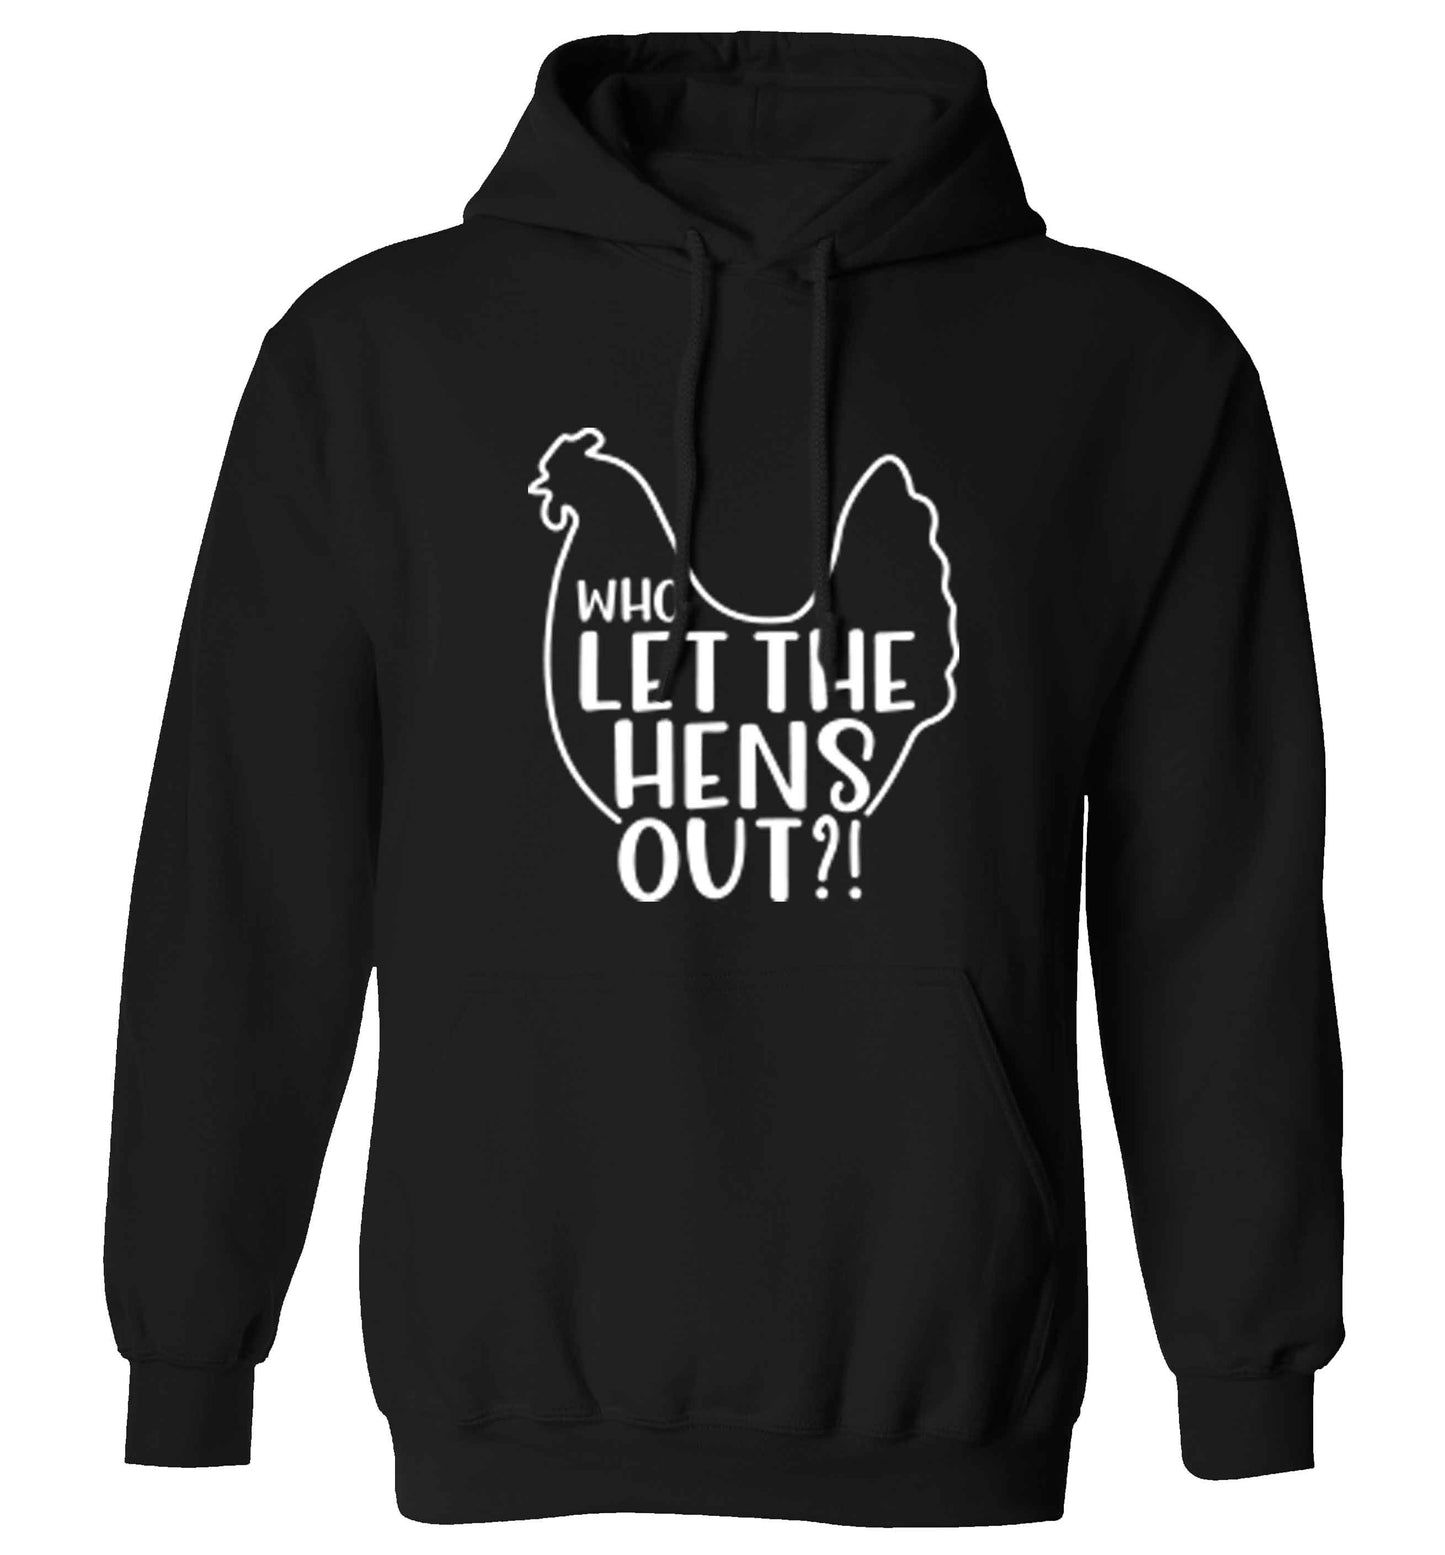 Who let the hens out adults unisex black hoodie 2XL